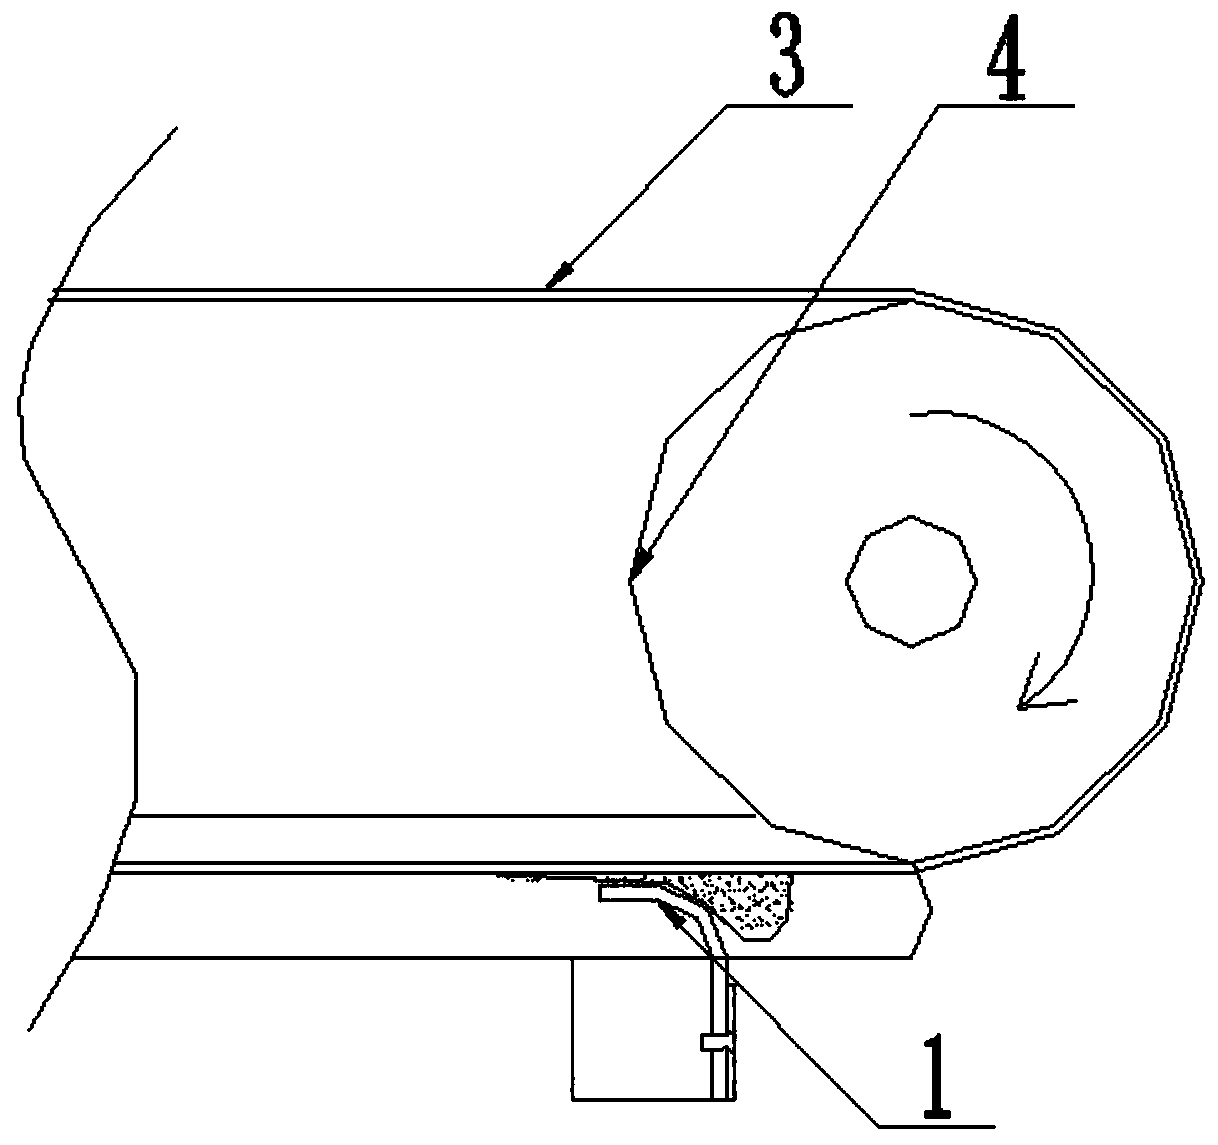 Chain plate purging device